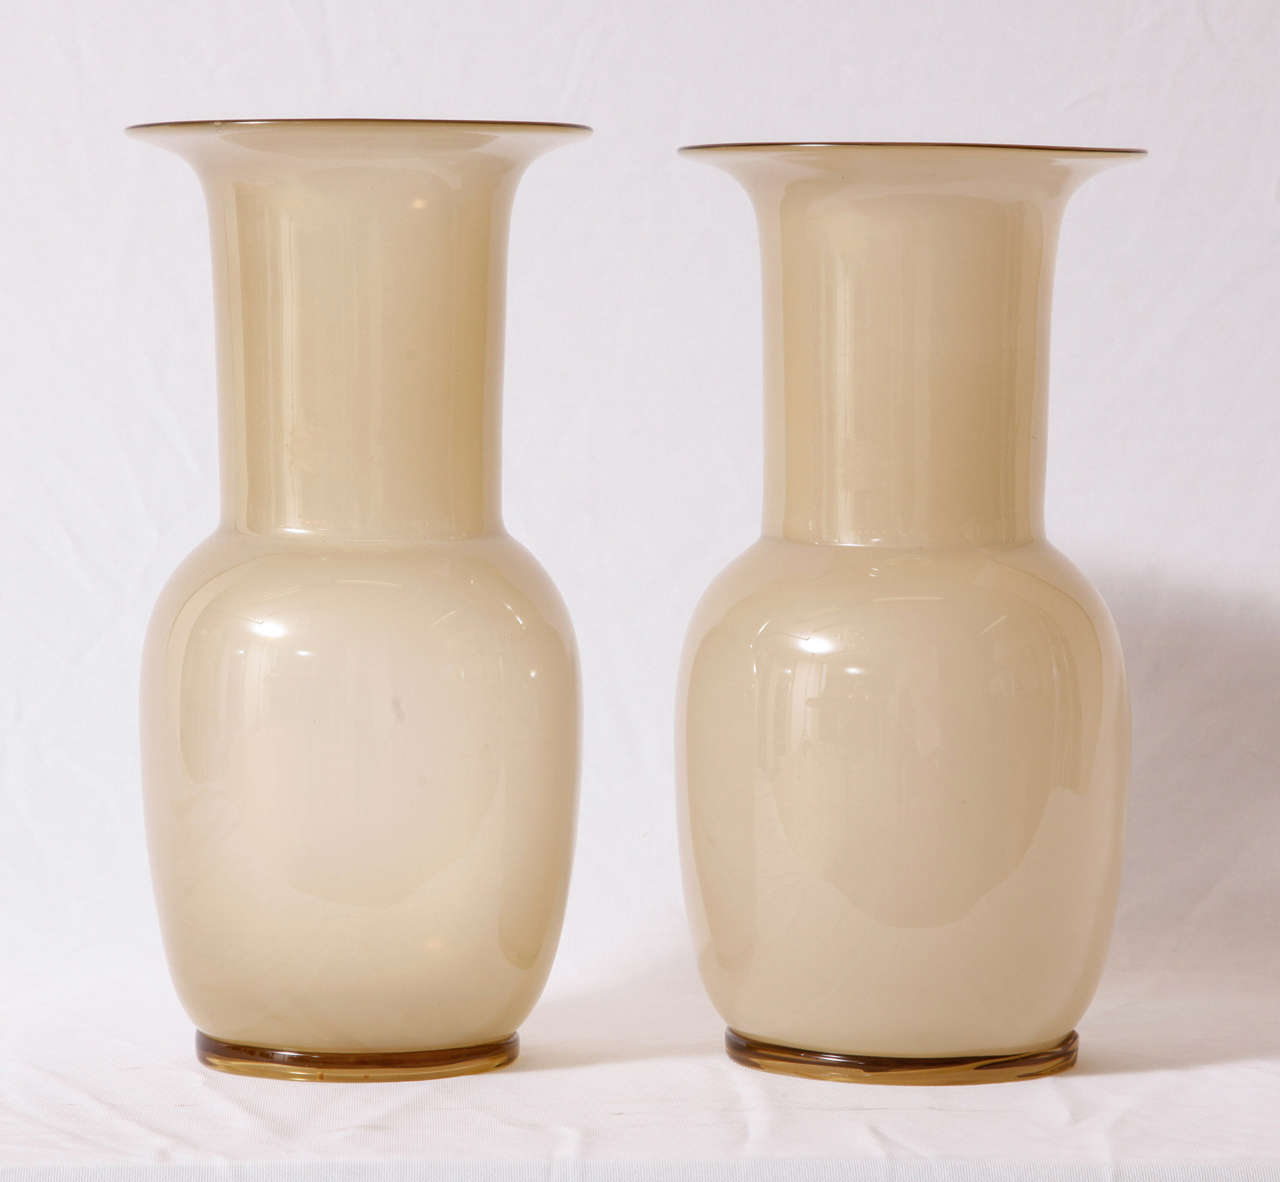 Two 'Incamiciato pagliesco' vases by the Italian architect Tomaso Buzzi (1900-1981) and executed by Venini, glassworks located in Murano,Italy.